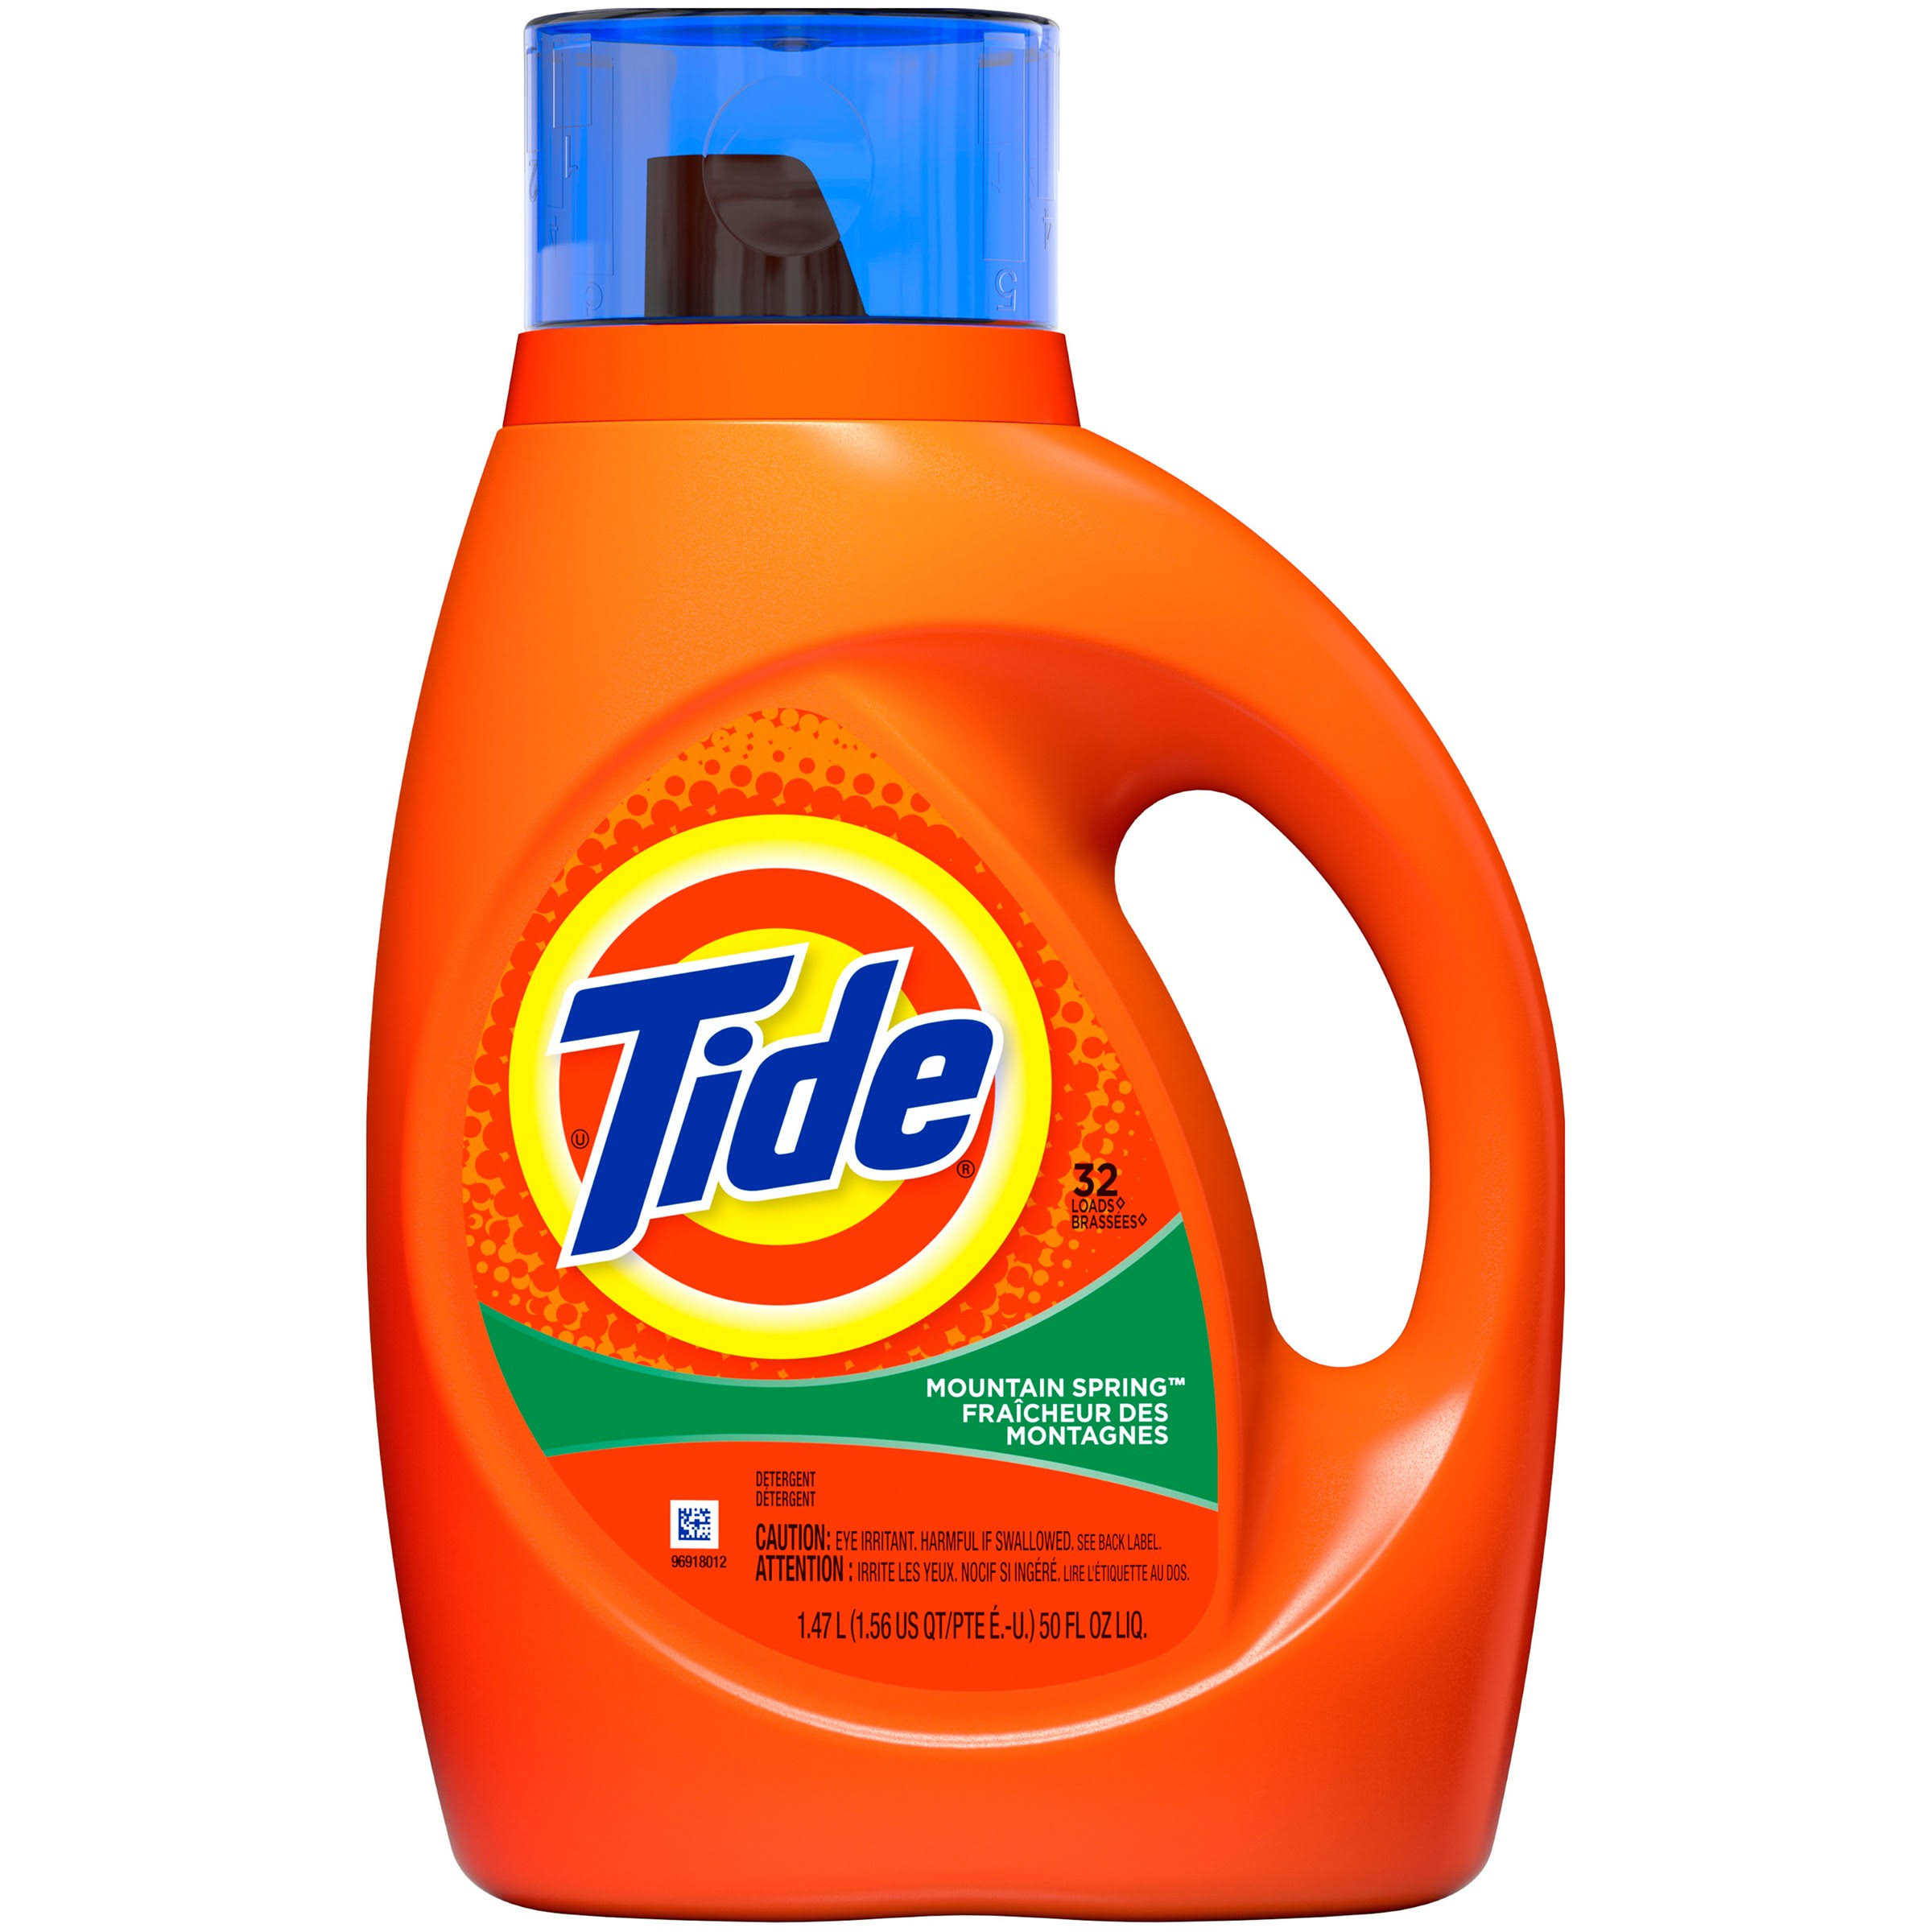 Tide Liquid Laundry Detergent - 32 Loads, Mountain Spring Scent